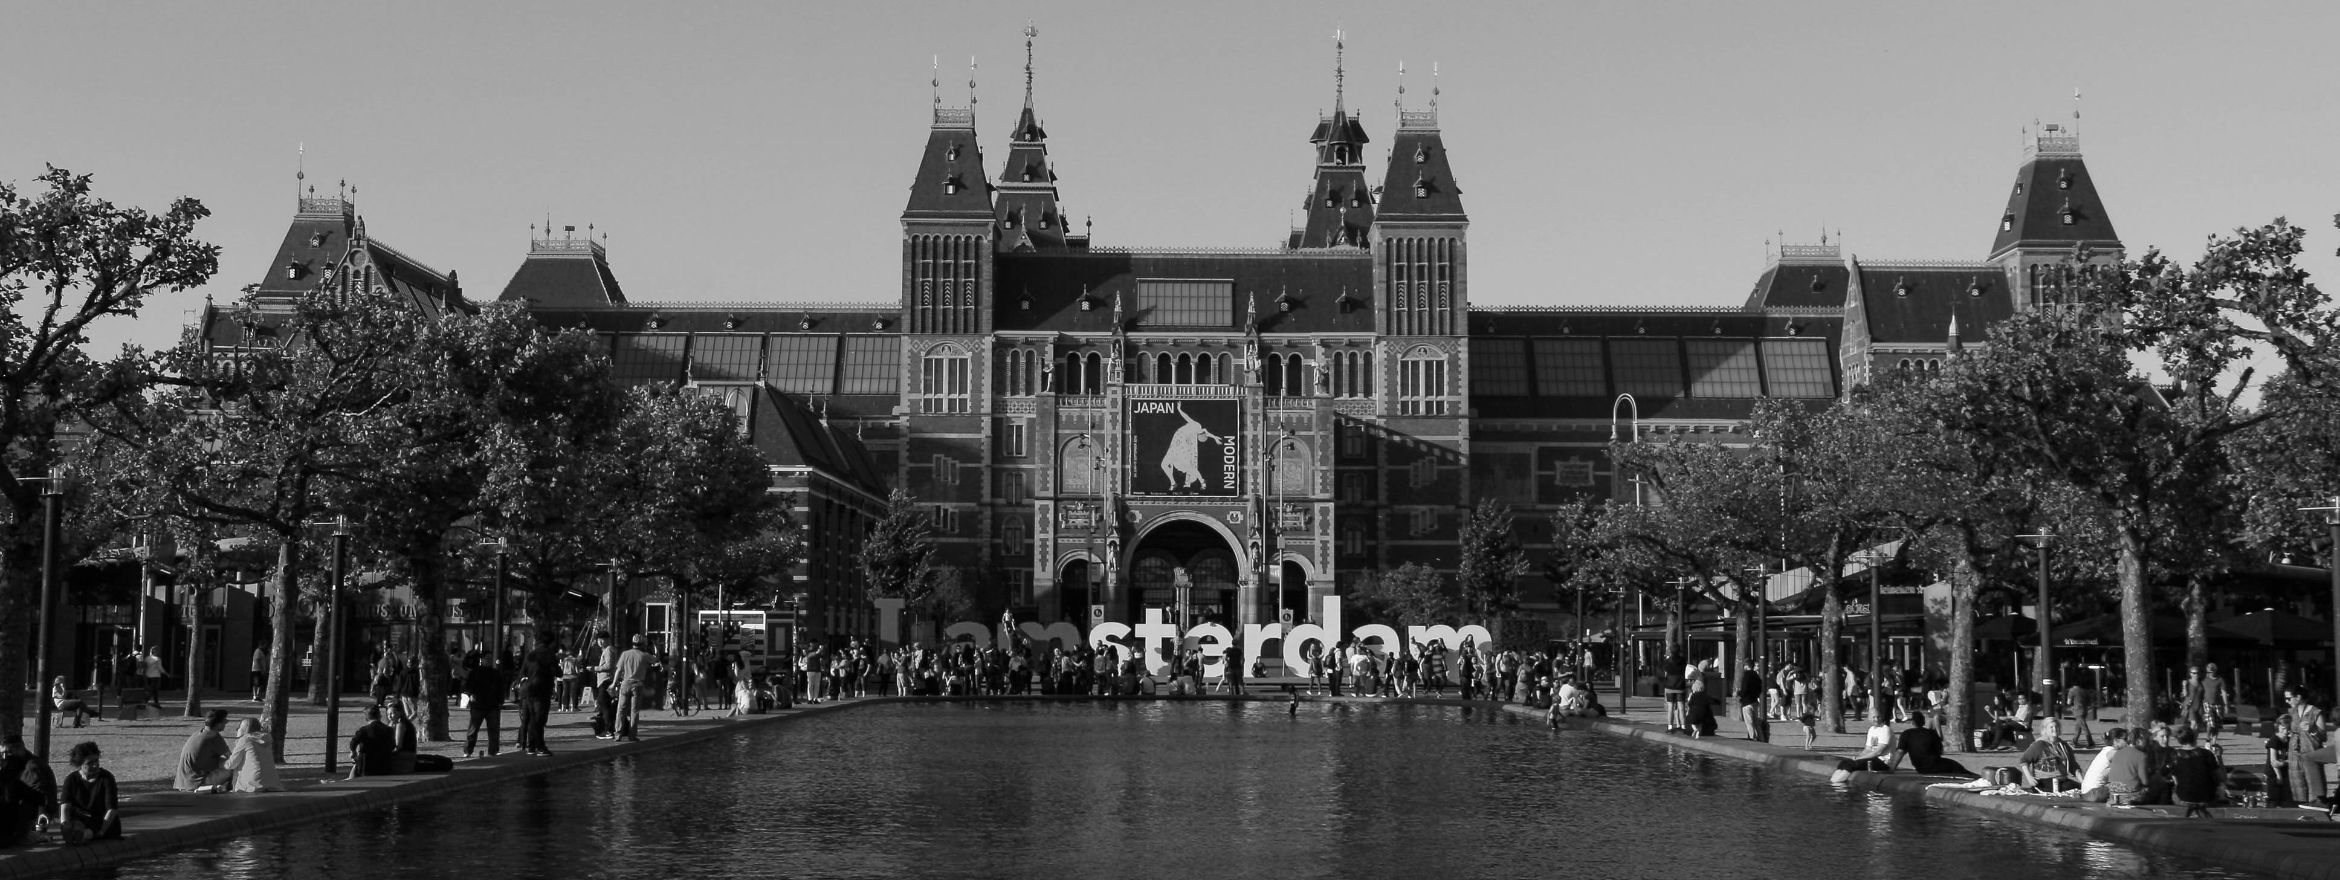 The Rijksmuseum on Horological Conservation